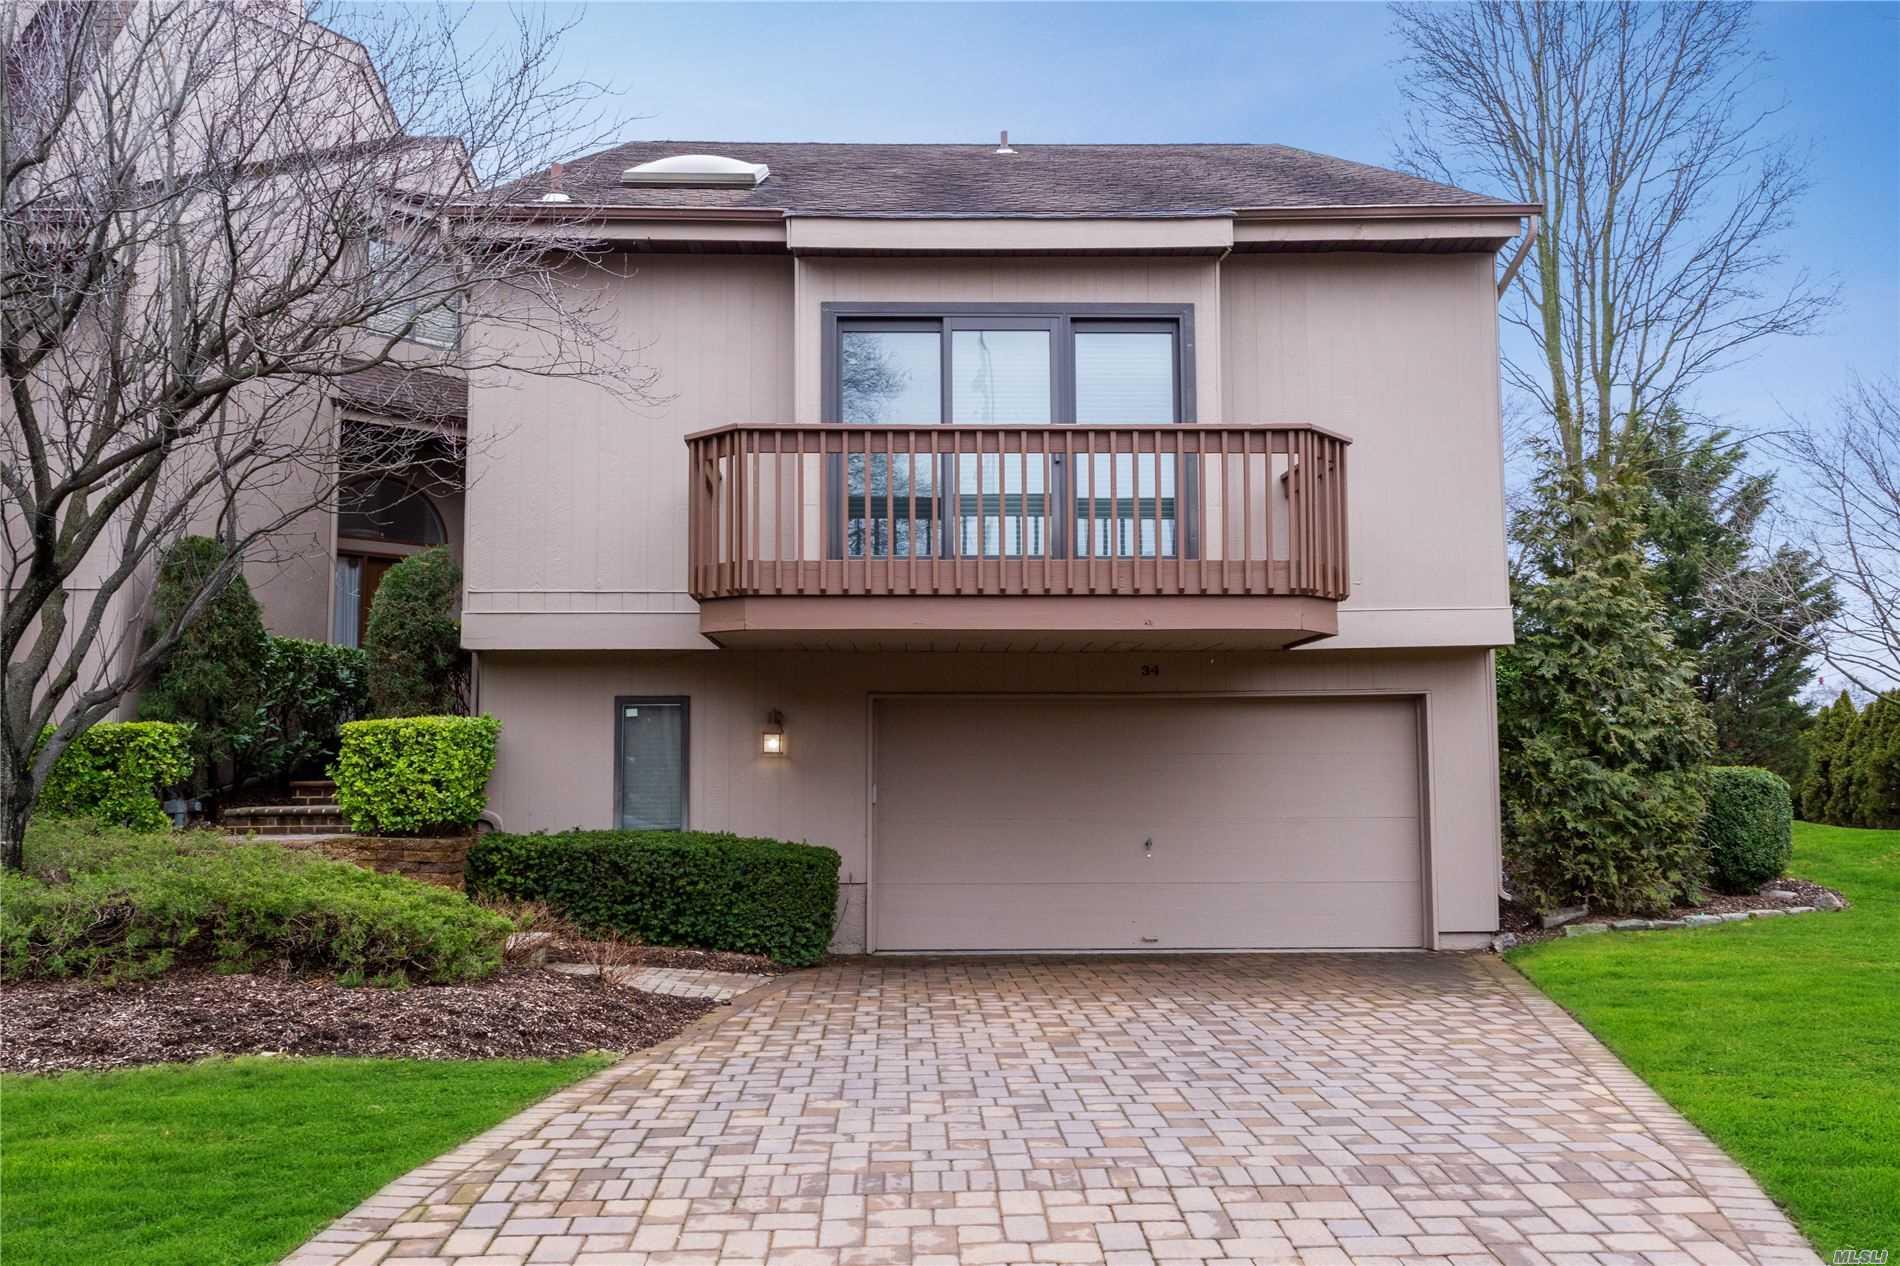 34 Clubside Drive #34 in Long Island, Woodmere, NY 11598